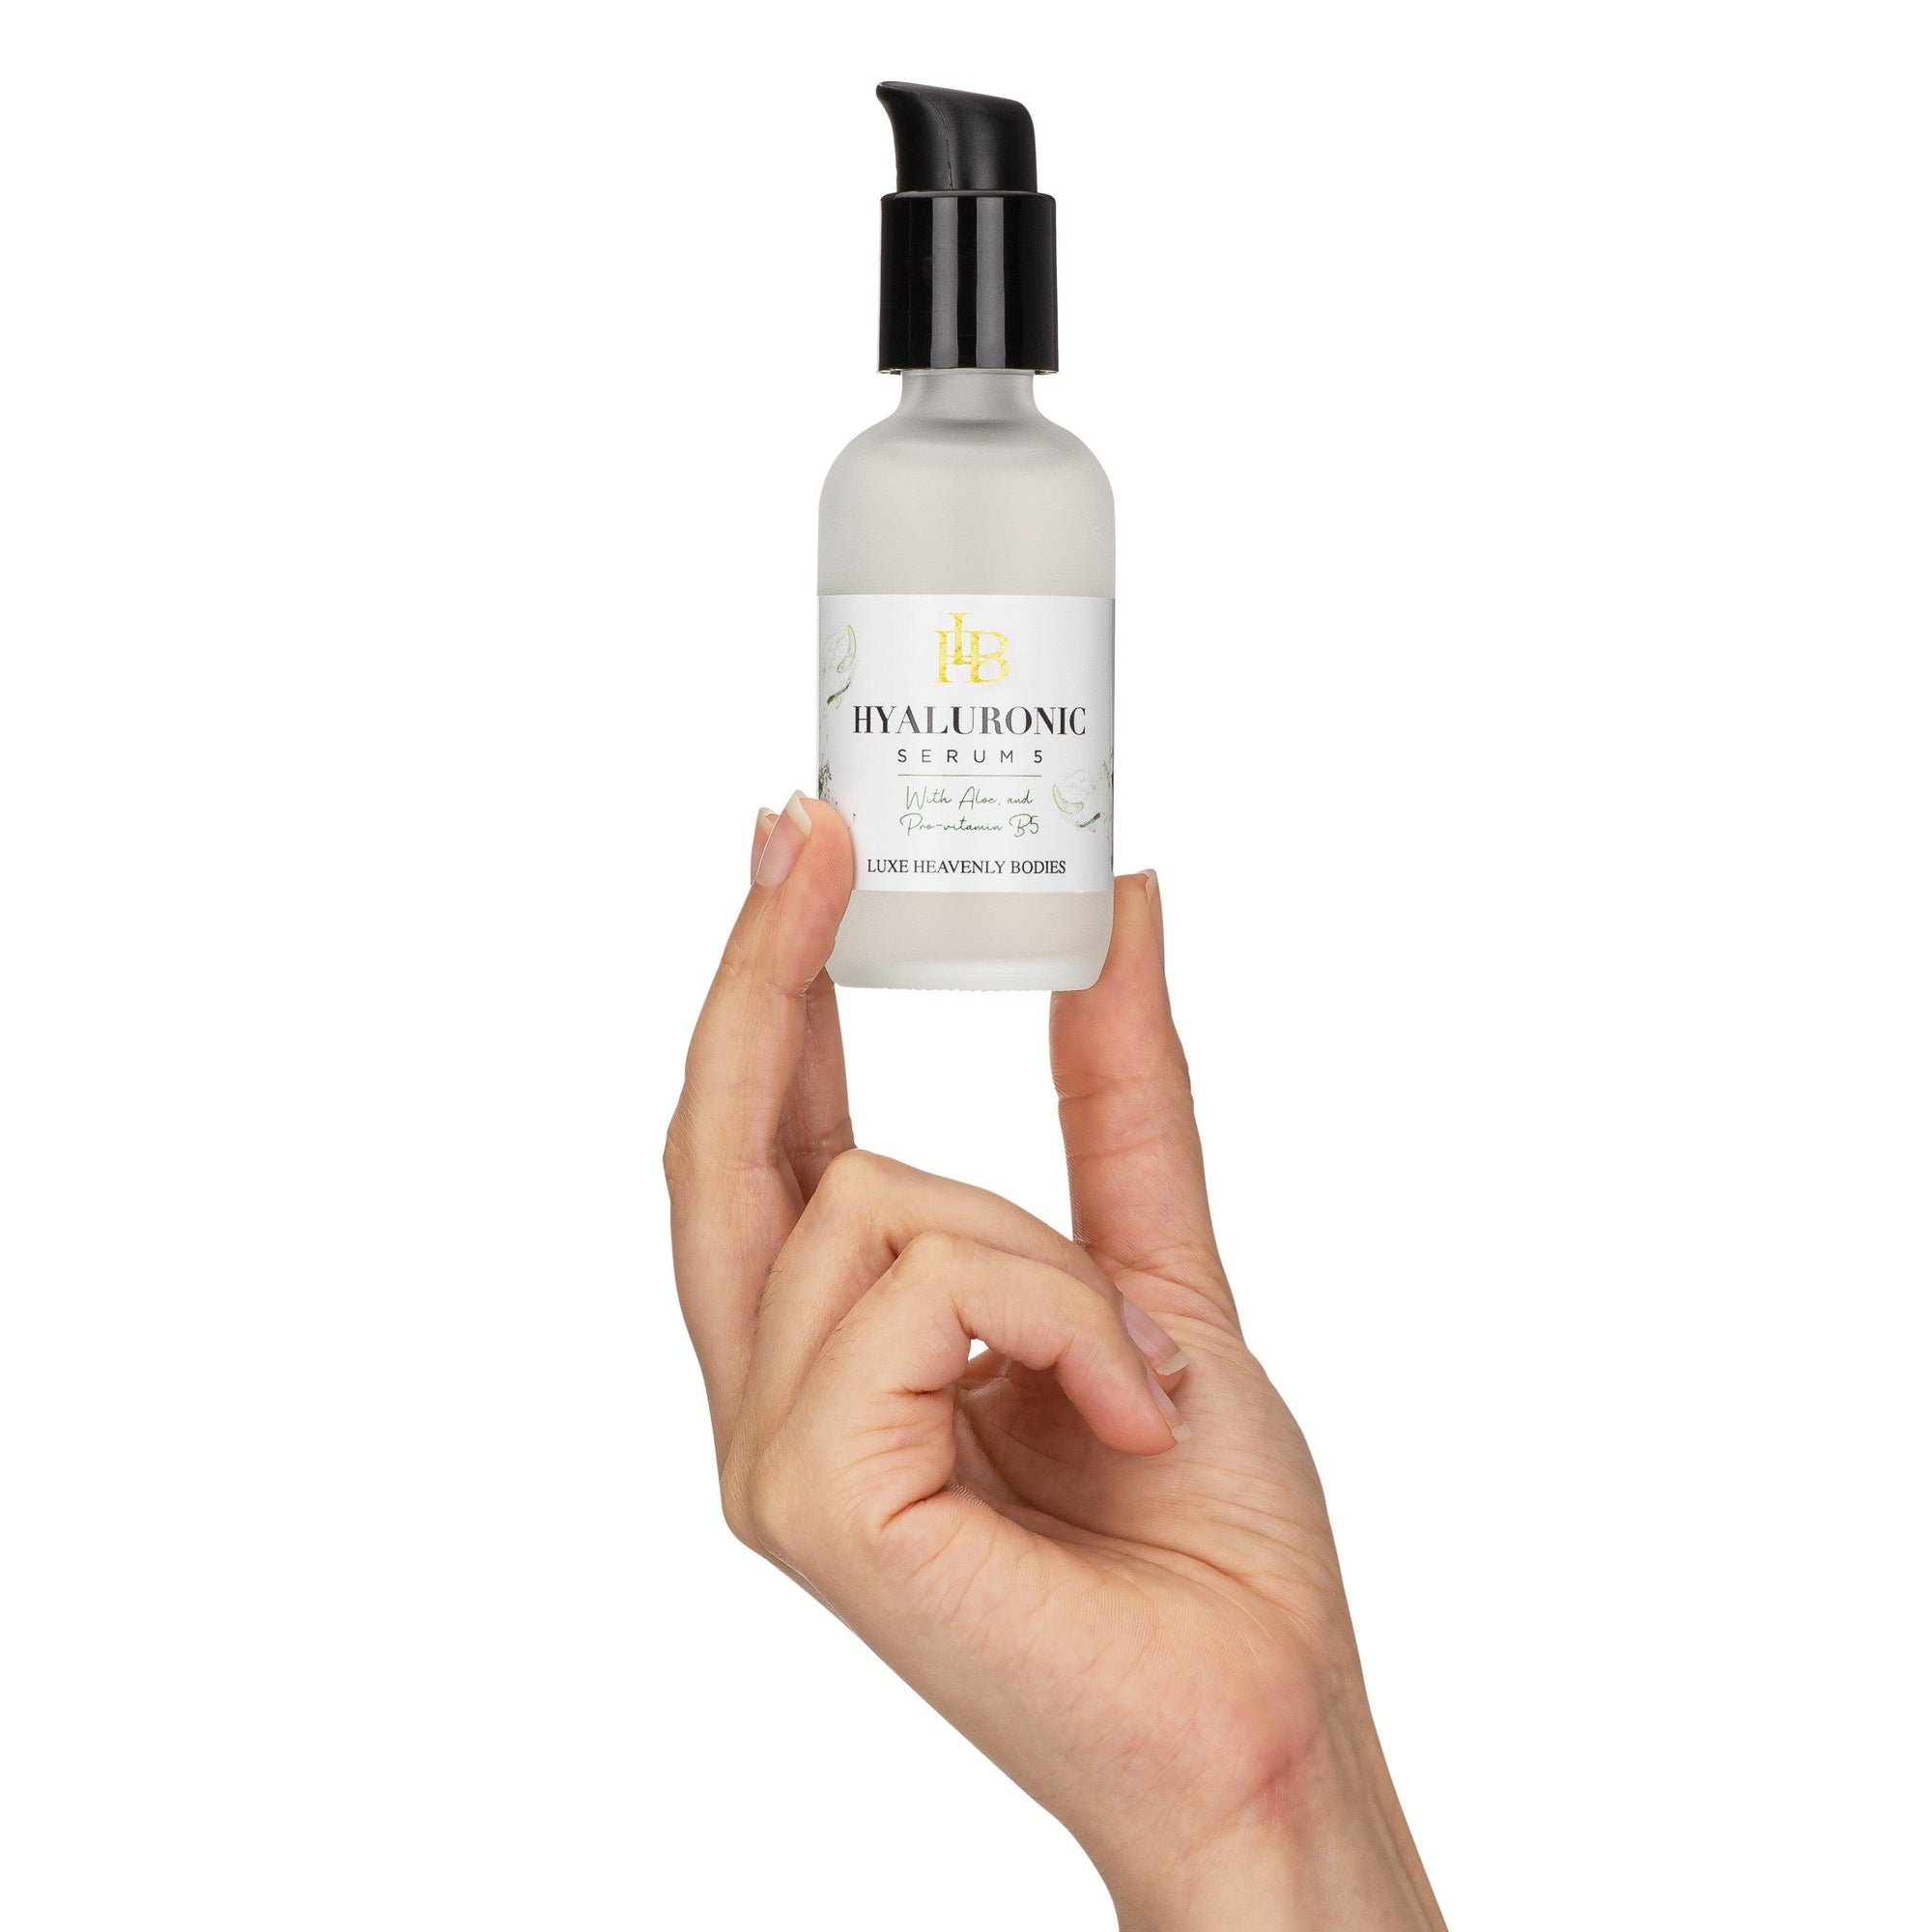 Hyaluronic Serum 5 - LUXE Heavenly Bodies